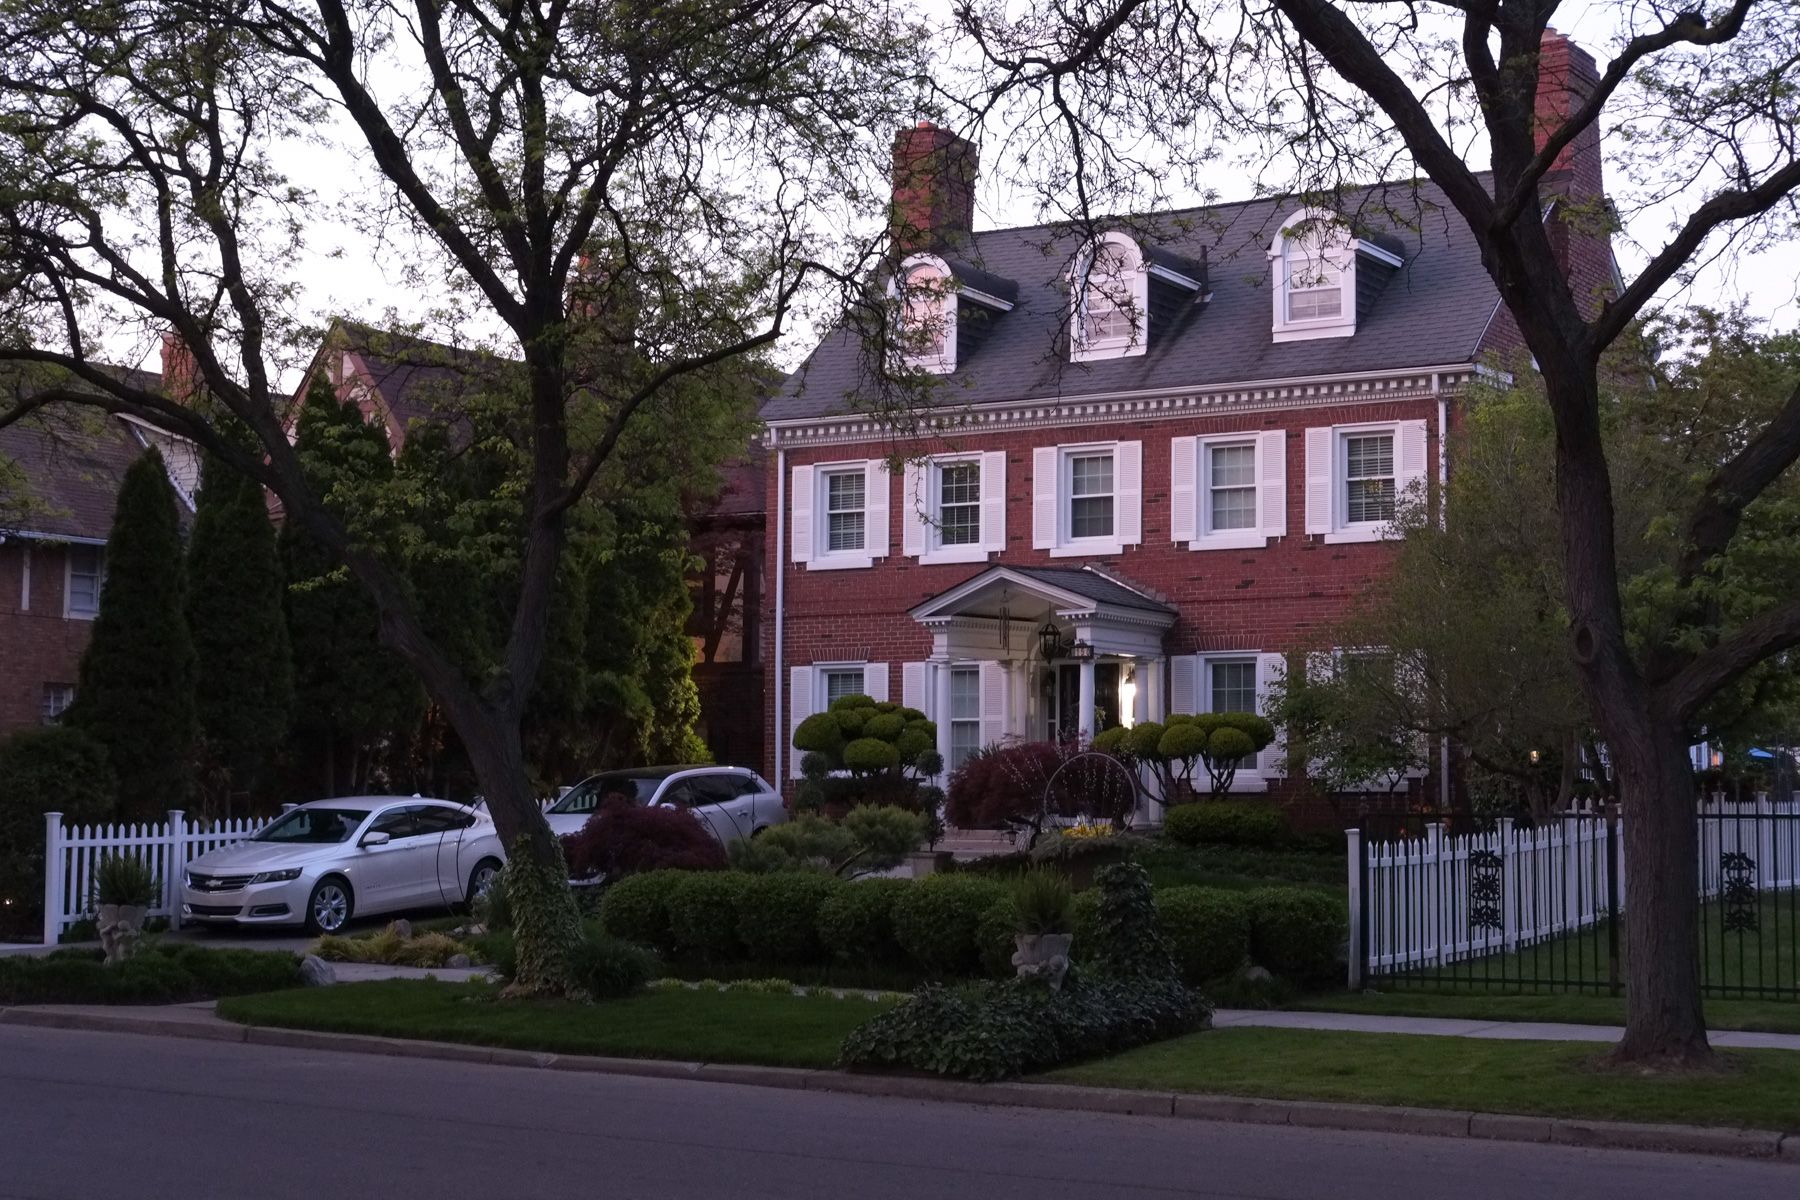 Dusk light, stately brick house with white shutters, well-appointed front yard shrubs.